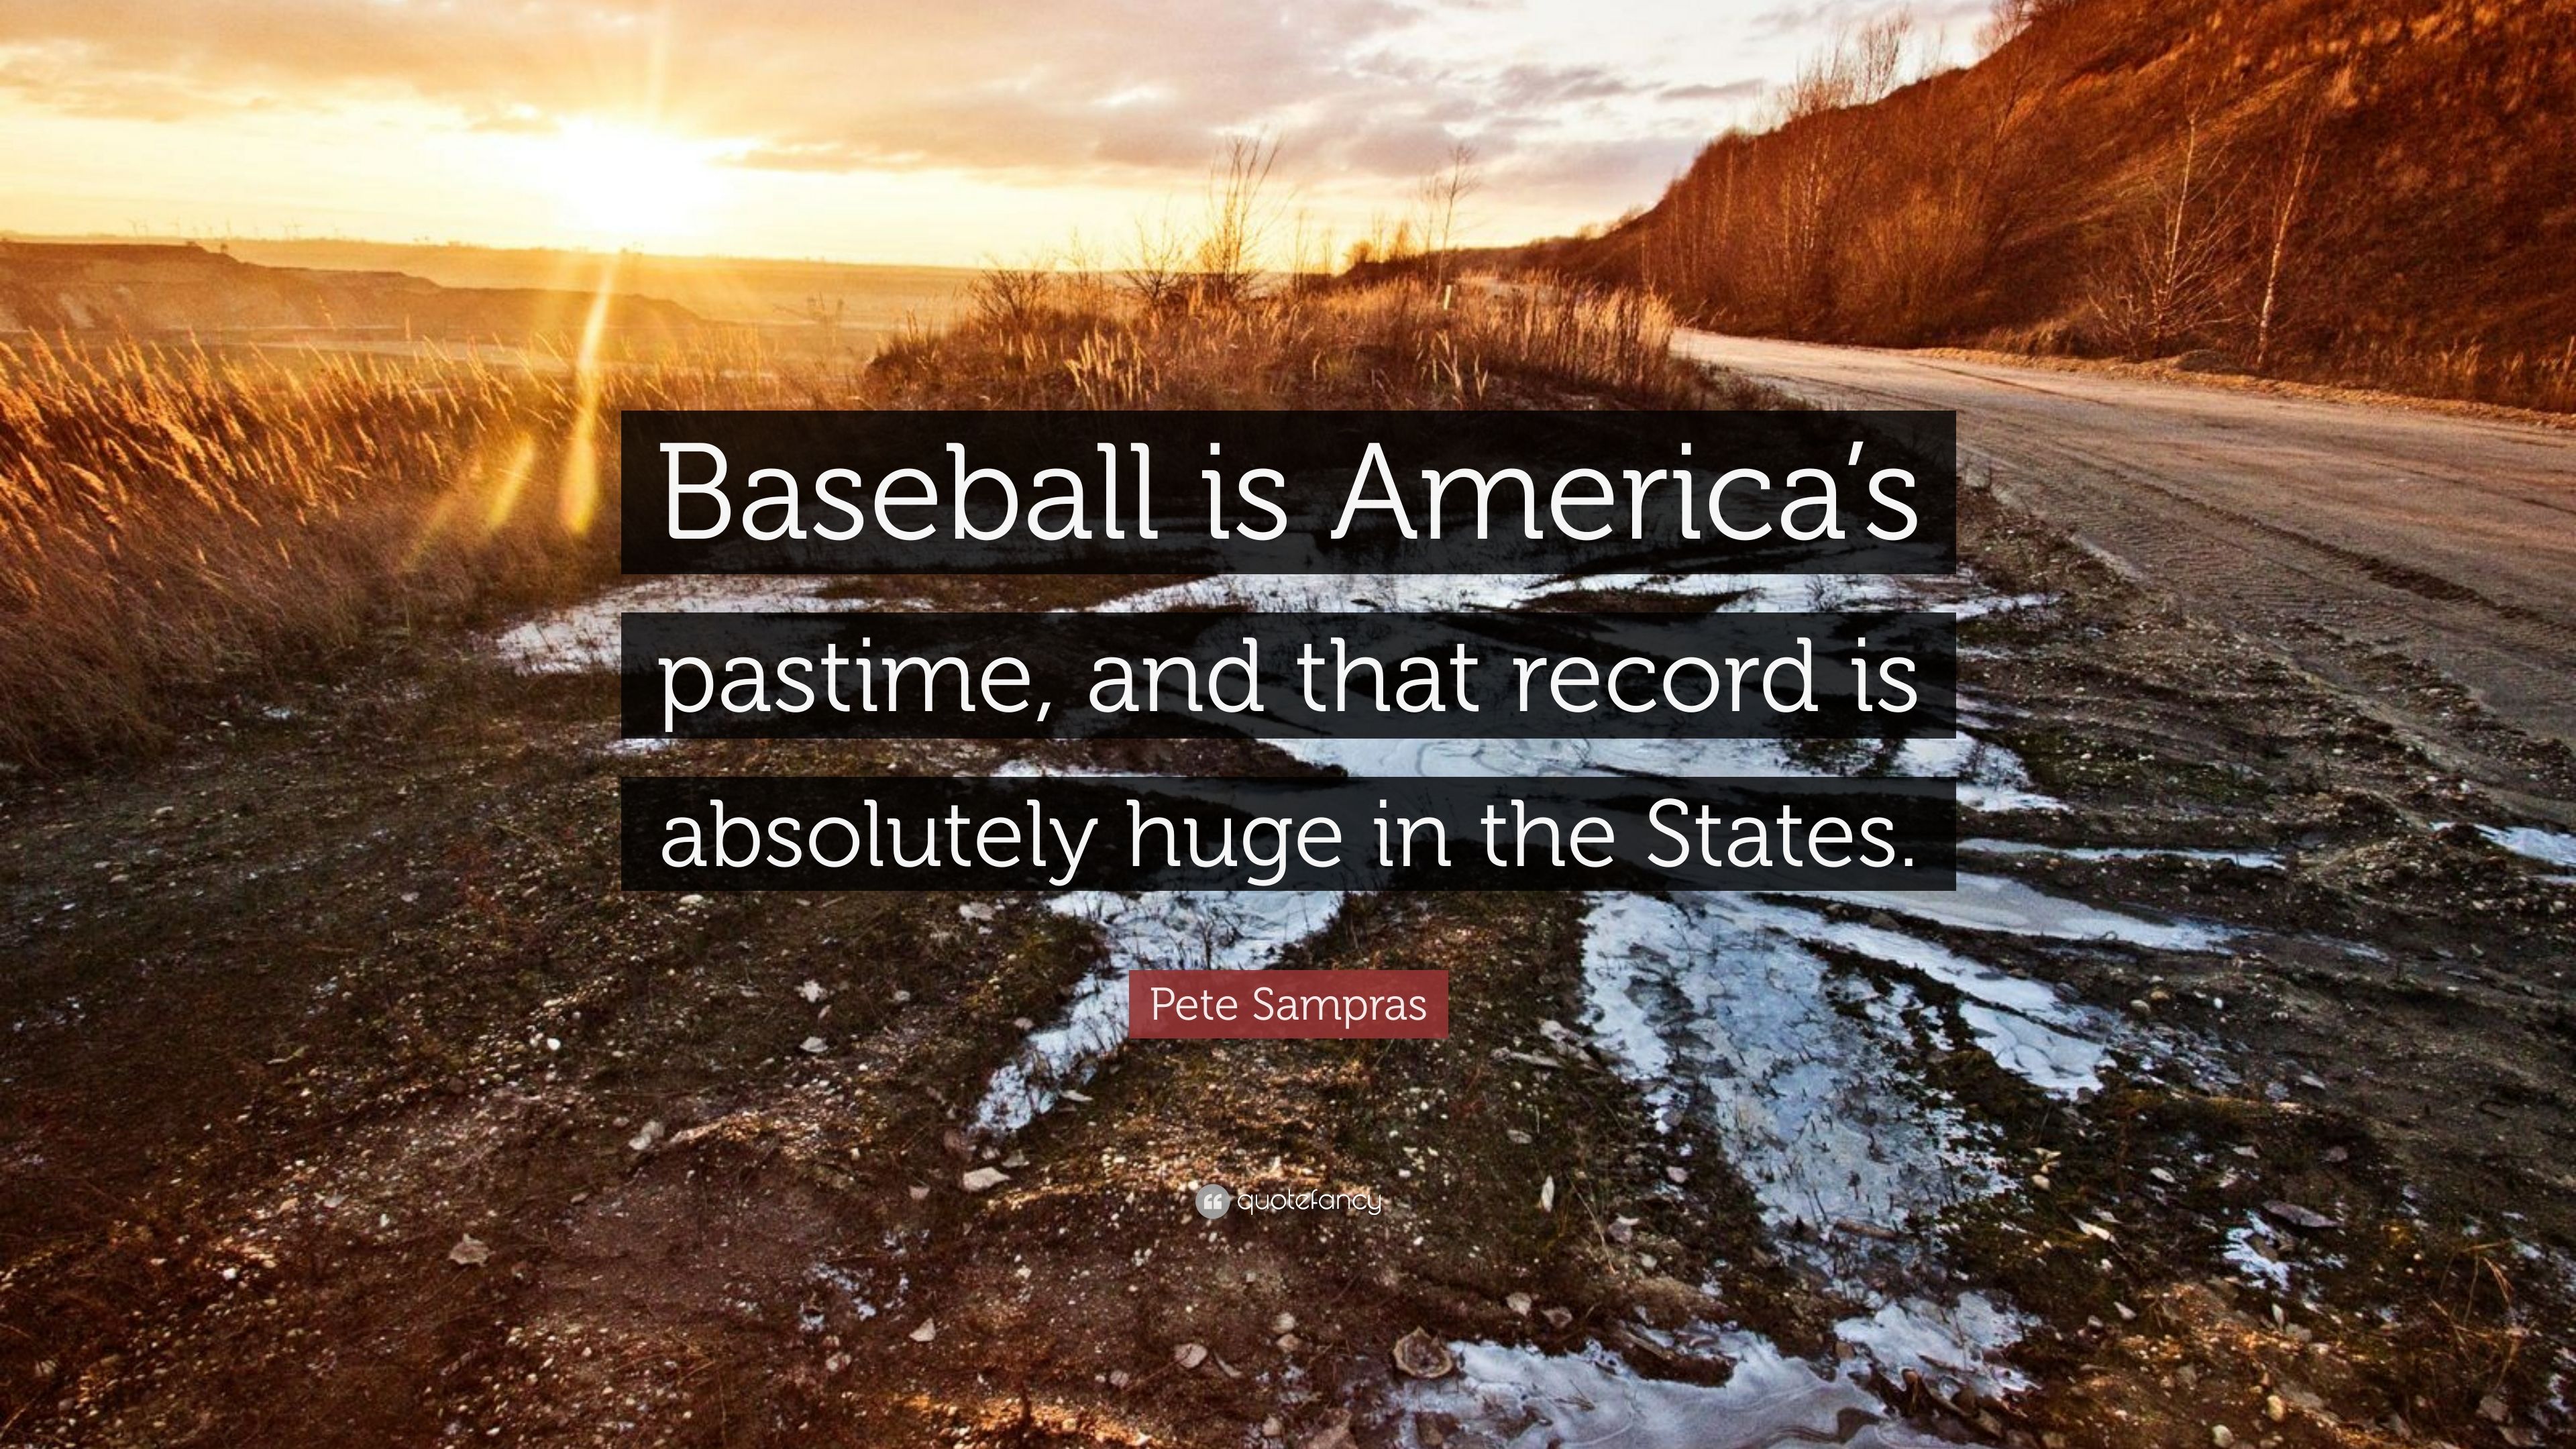 Pete Sampras Quote: “Baseball is America's pastime, and that record ...